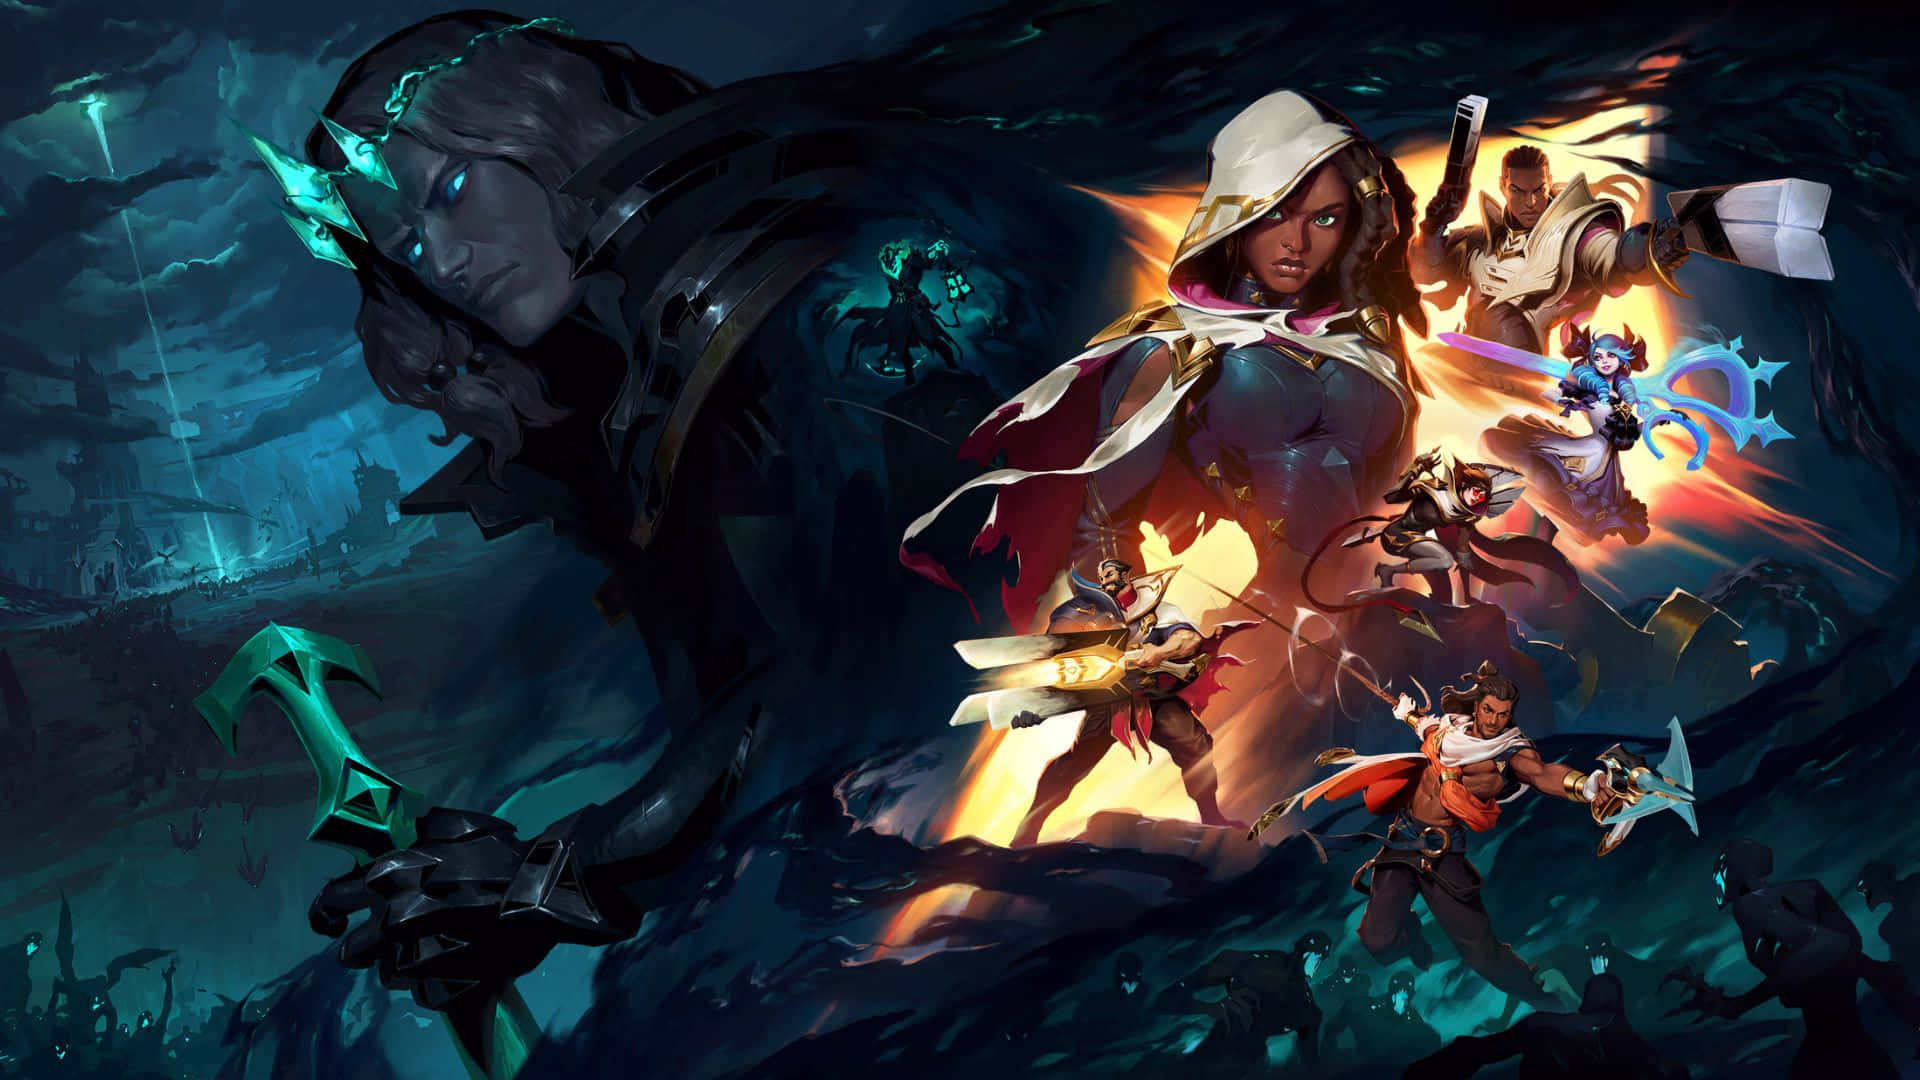 Battle the enemy forces in League of Legends